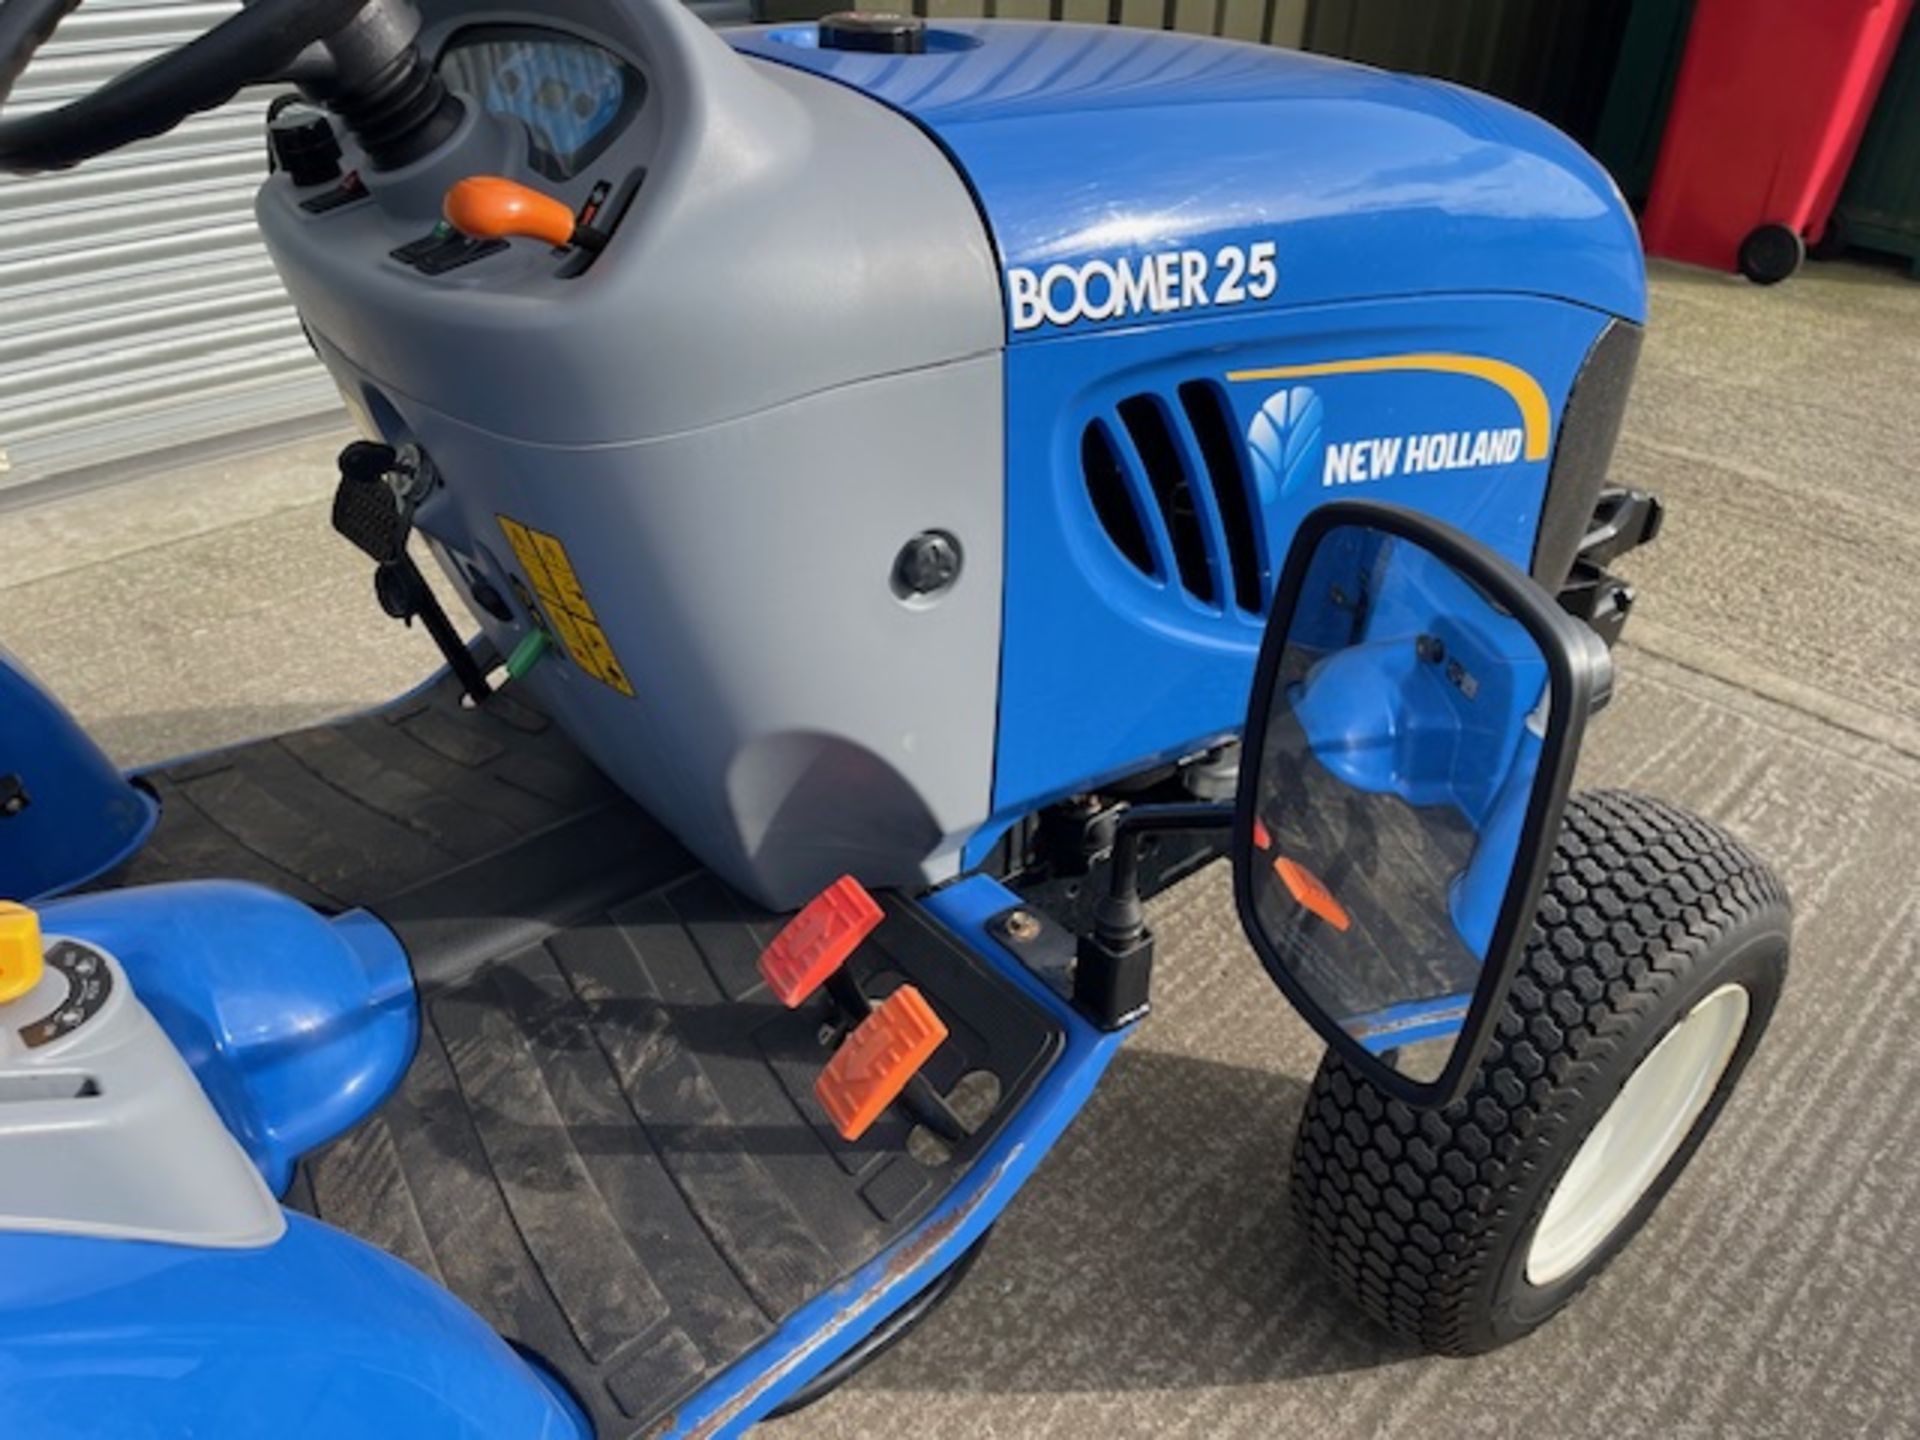 2019, NEW HOLLAND BOOMER 25 COMPACT TRACTOR - Image 10 of 11